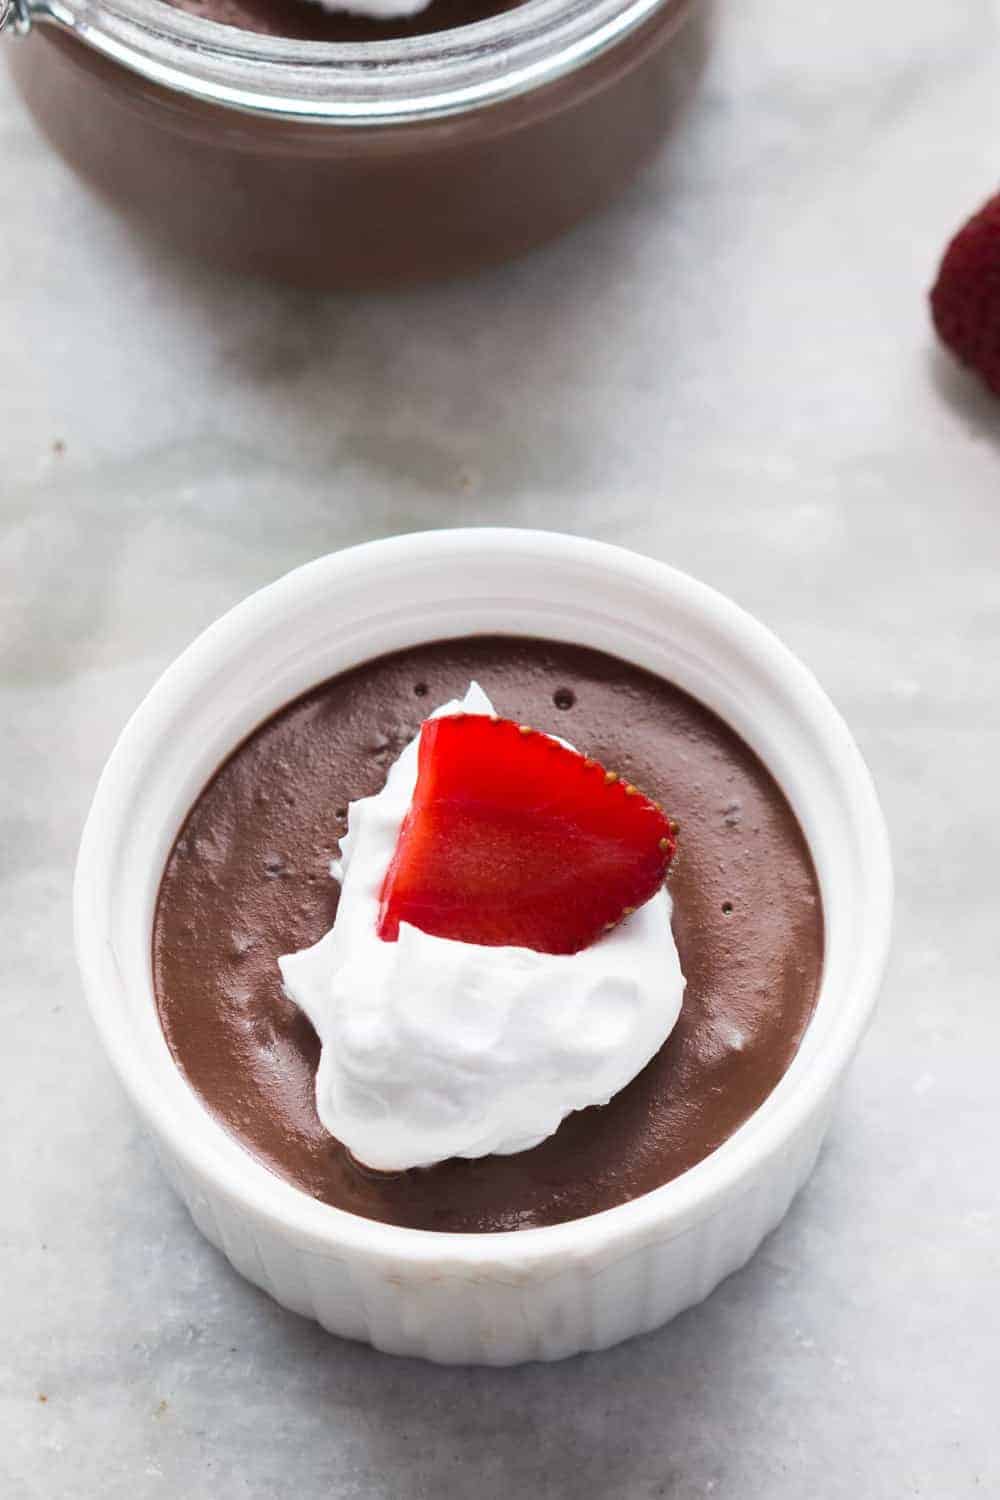 A picture of the chocolate pudding topped with whipped cream and a strawberry and served in a white bowl.